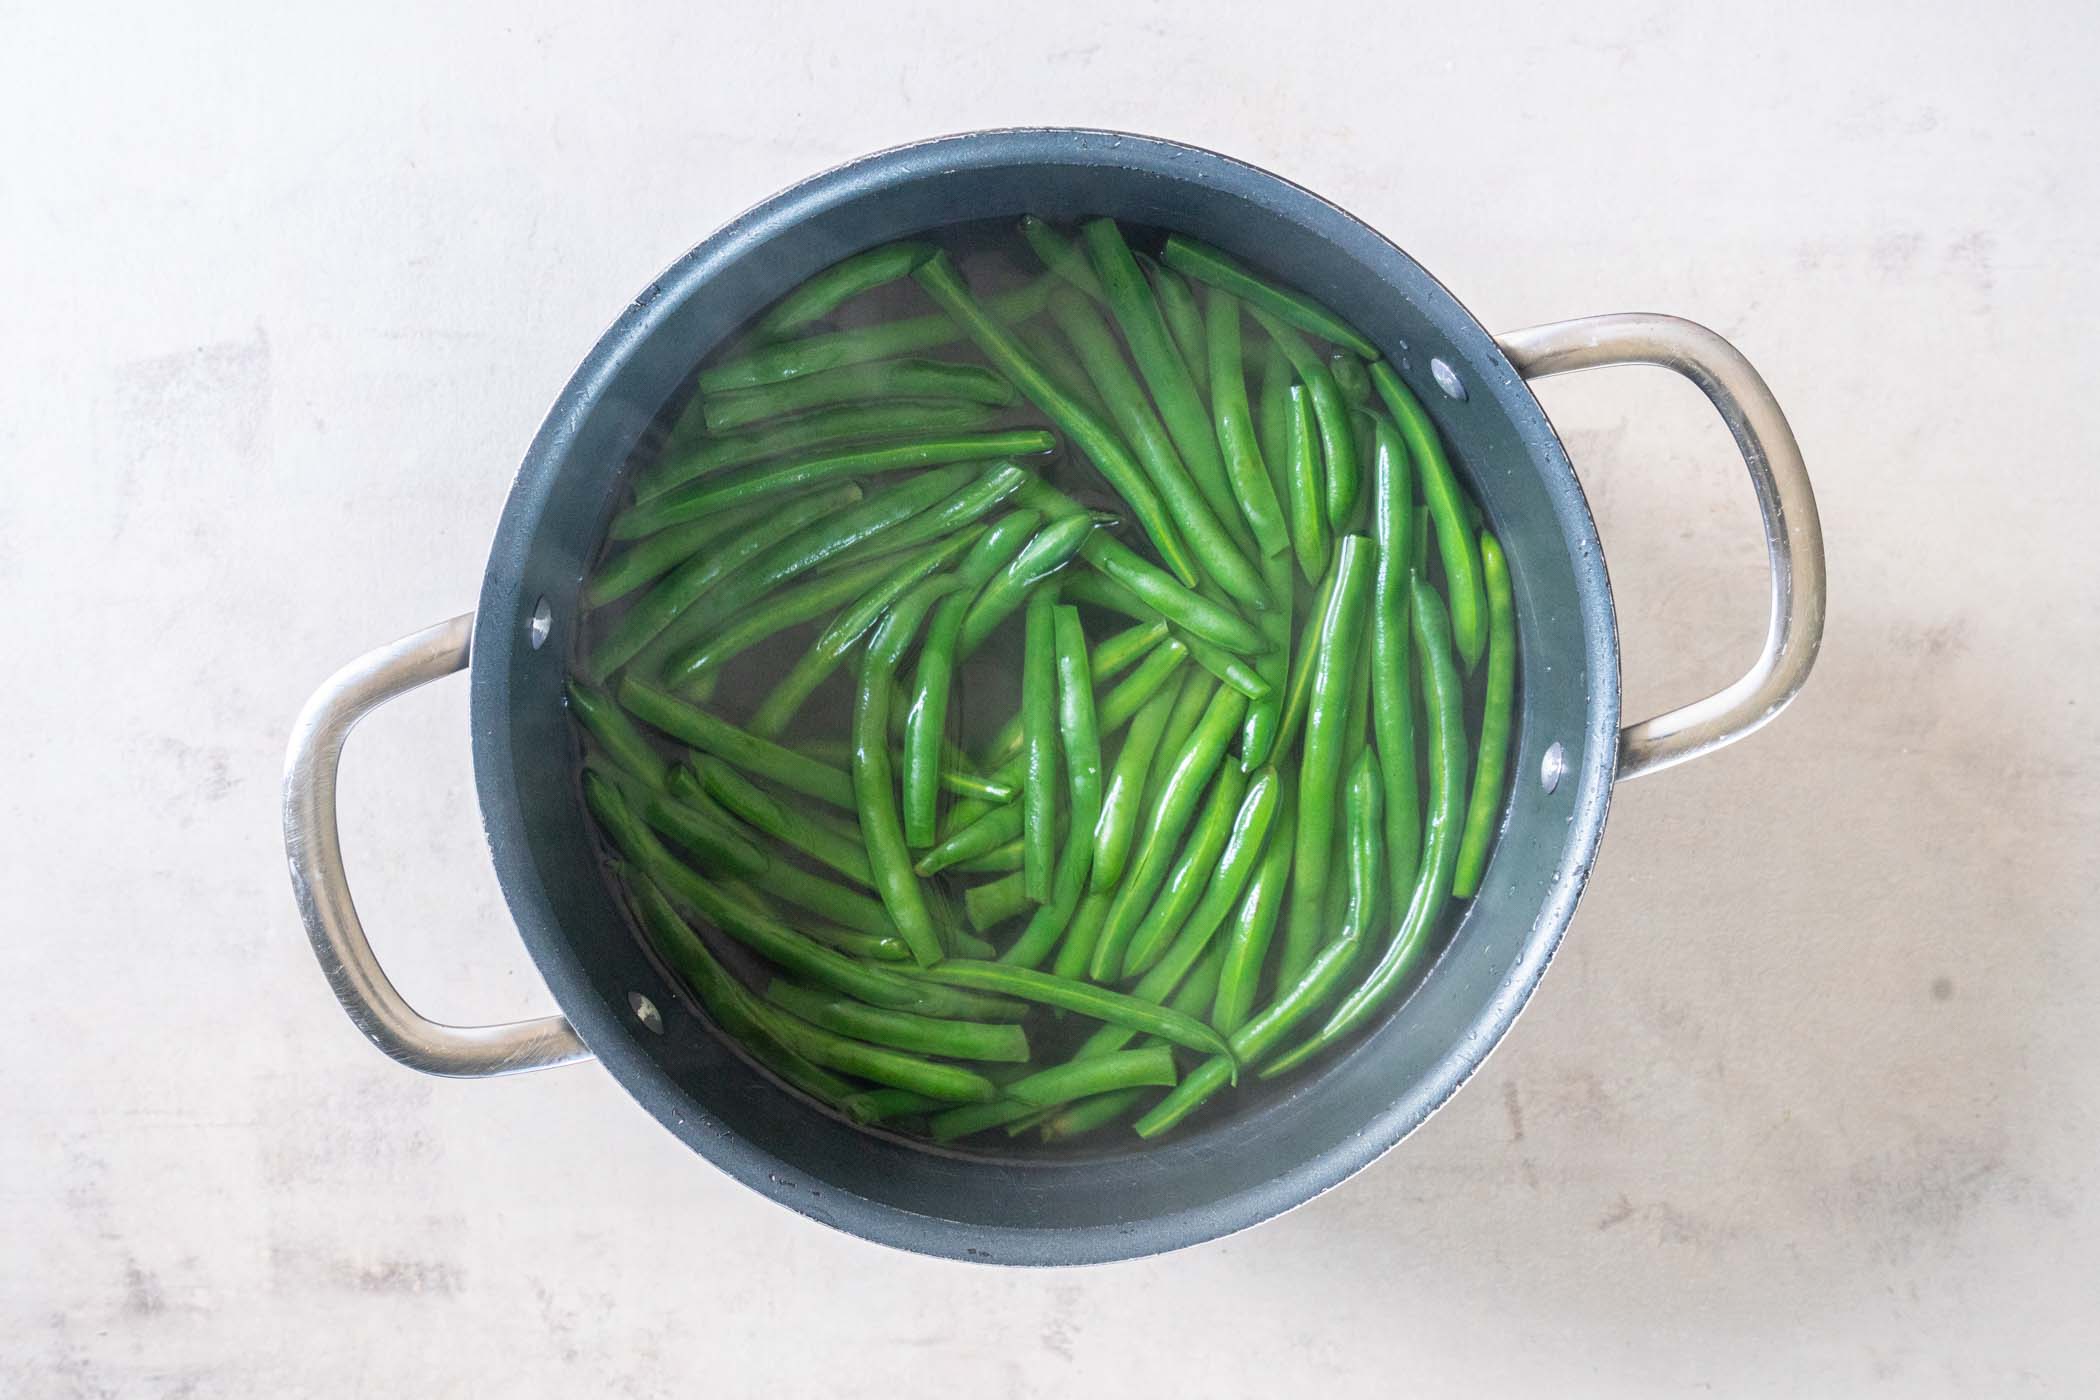 Boiled green beans in pot of water.